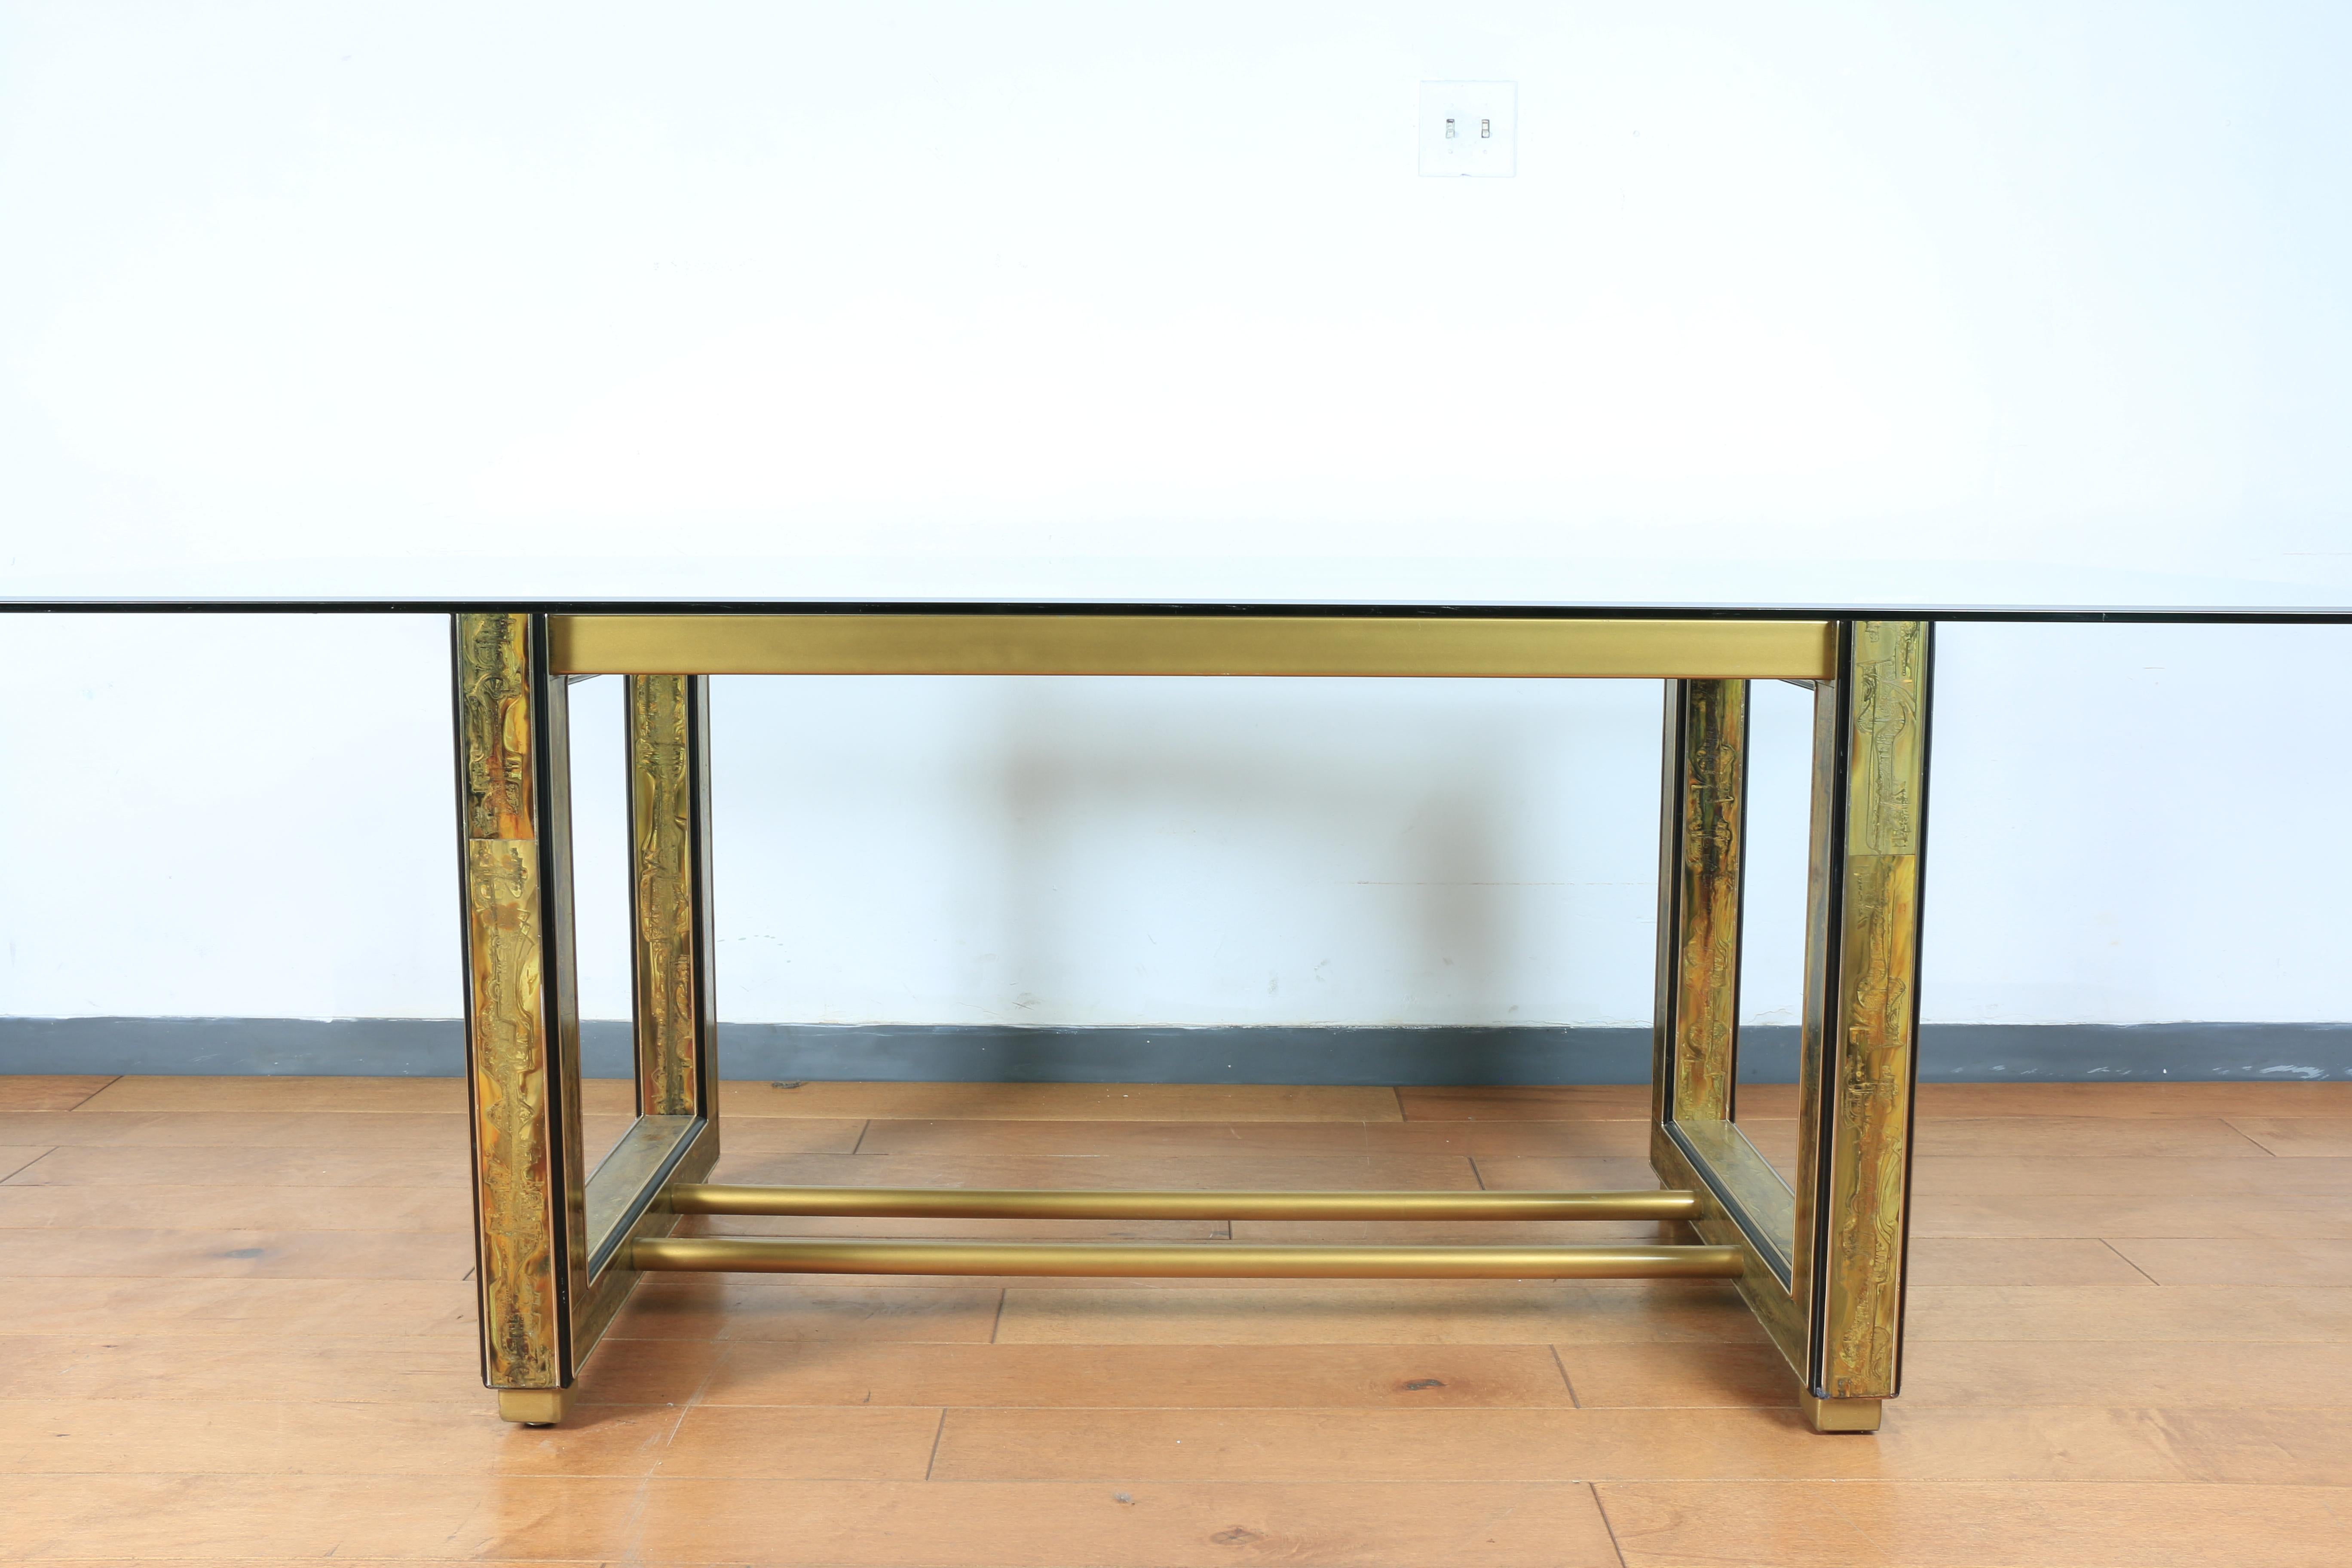 Vintage mid century Mastercraft dining table with glass top. Beautiful detailed Mastercraft base with no damages. Great for any Mid Century home or office. Glass does not have chips.